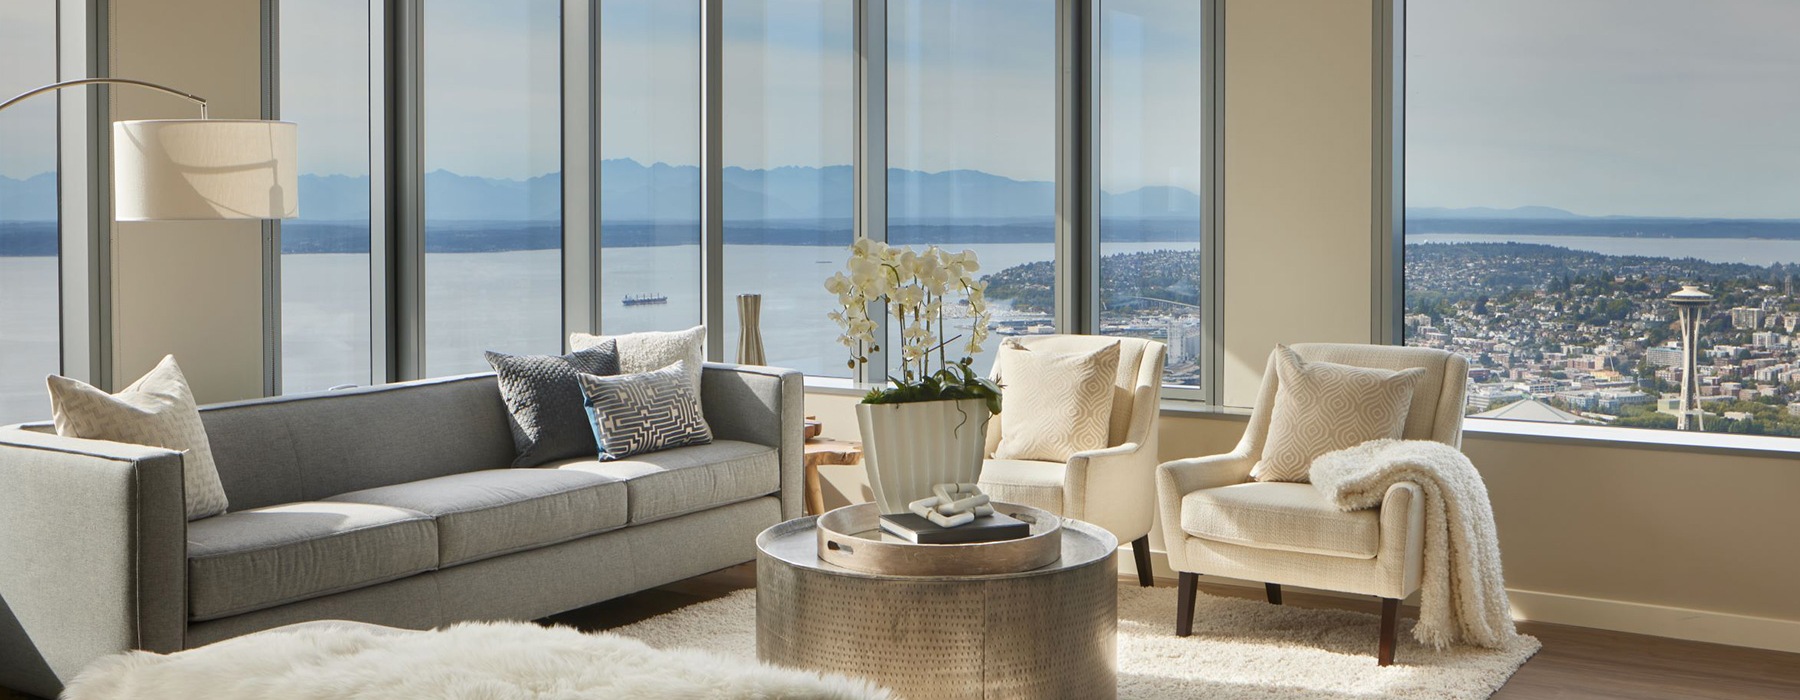 spacious living room with modern furniture and ample lighting from wall-to-corner windows also showing wide city views